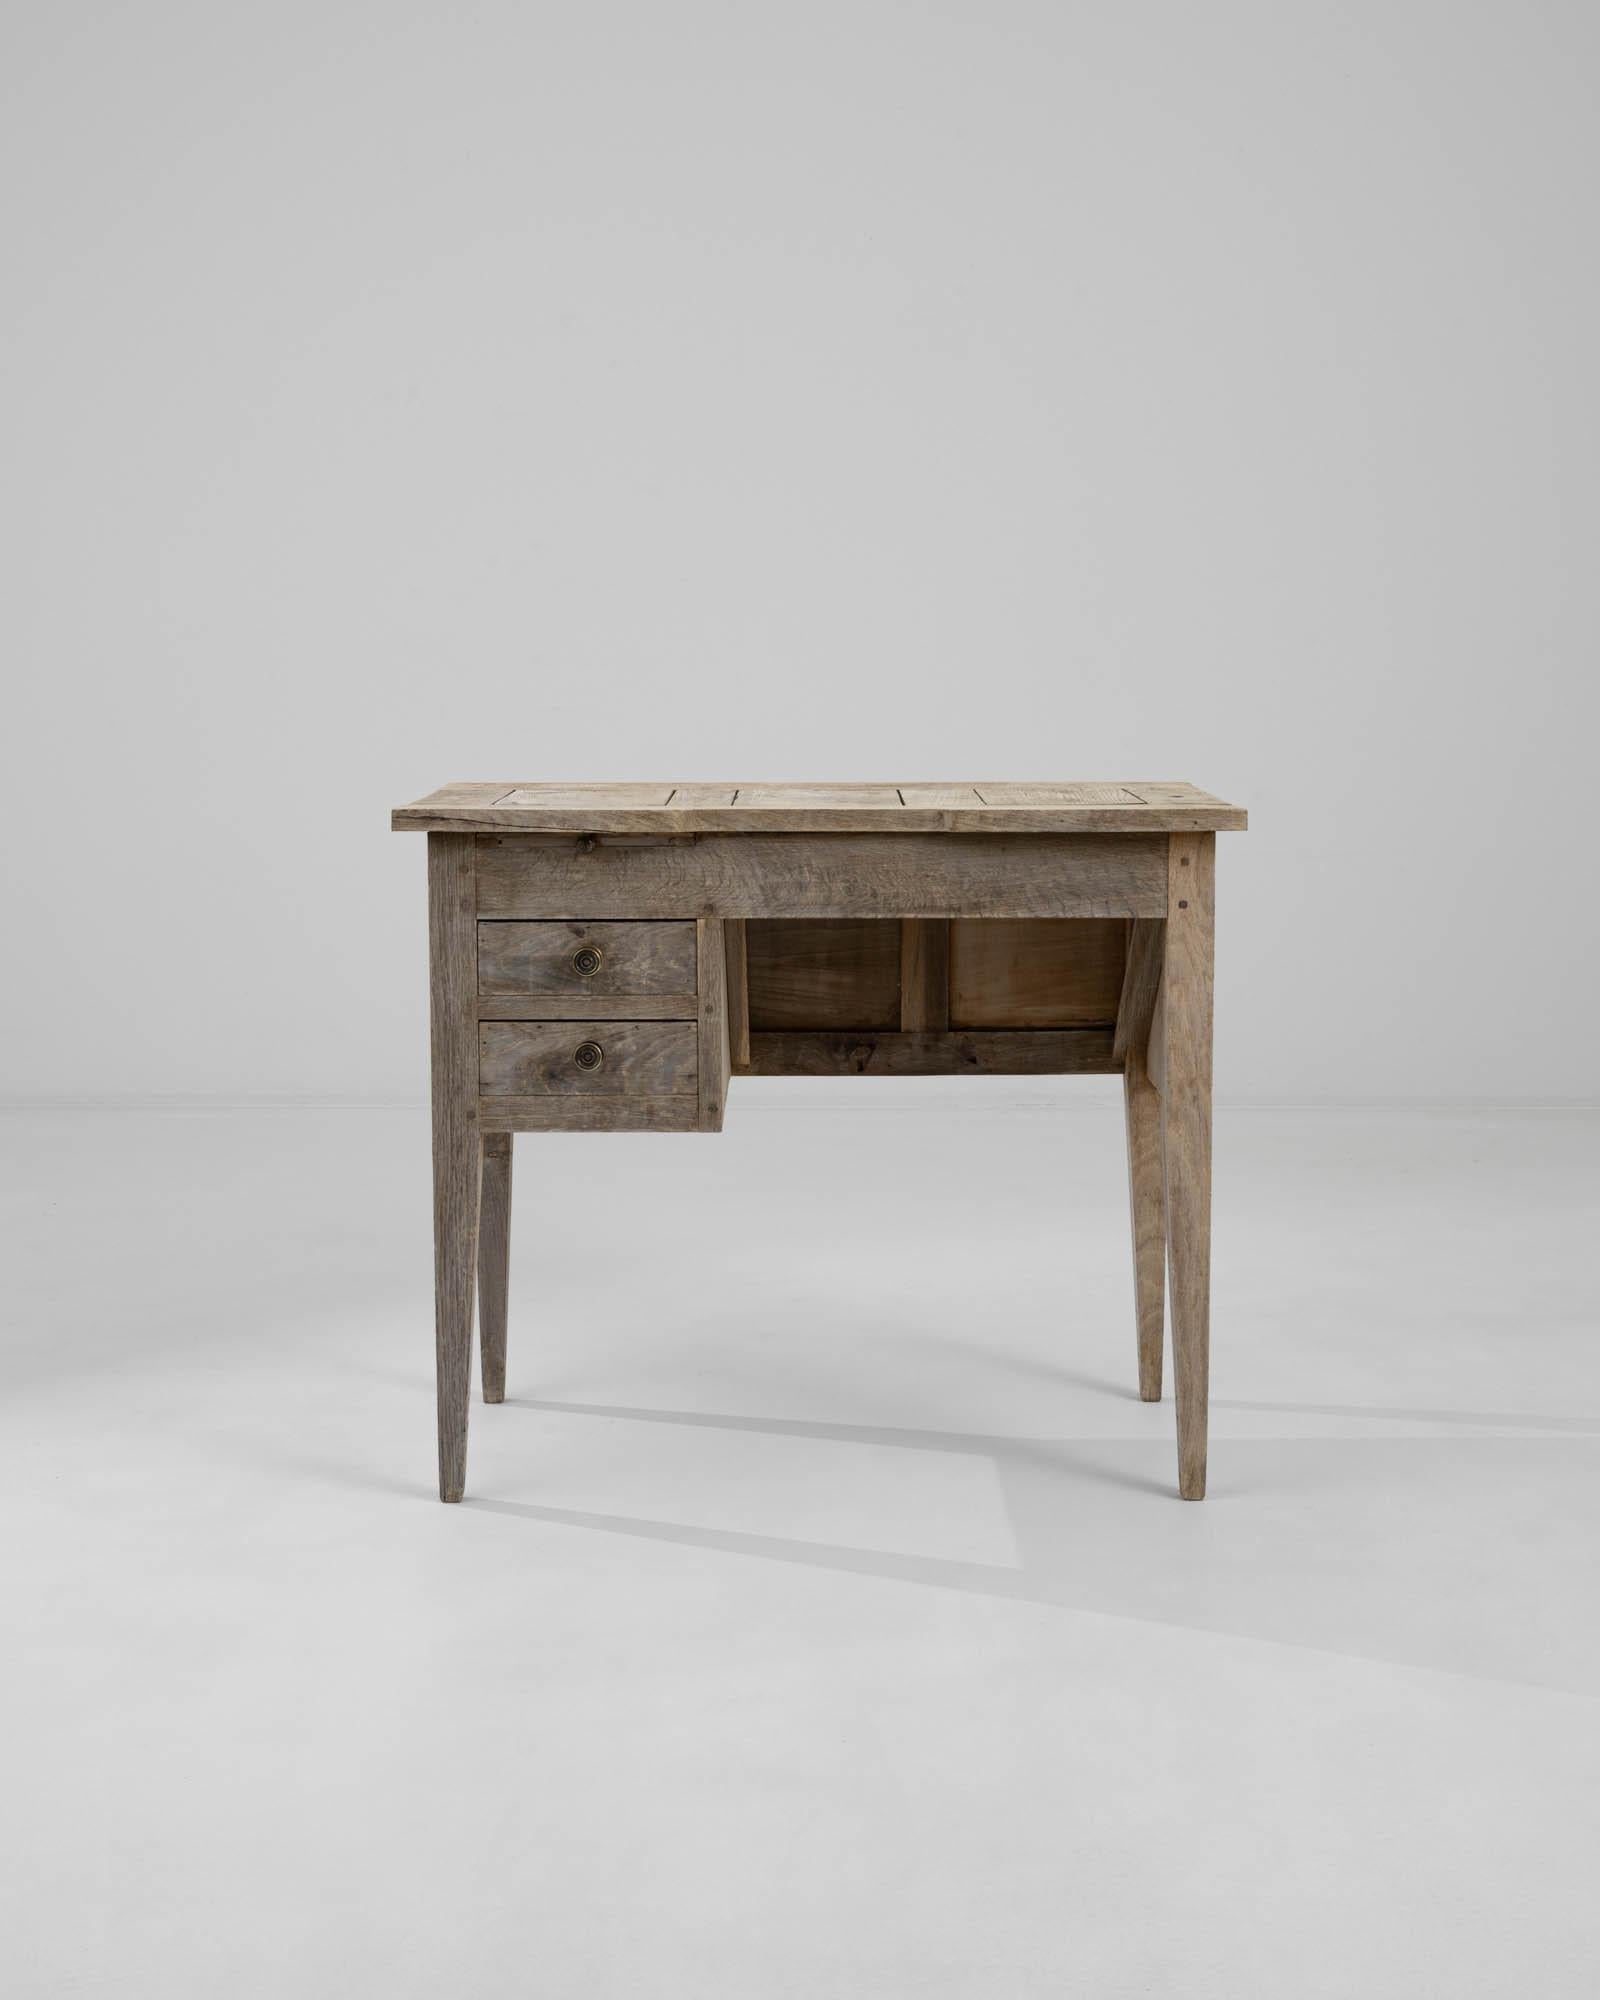 A wooden desk created in 1900s France. Neatly composed, highly functional and understated, this petite, oak desk exudes a quiet ornament. A delicate bleaching process has been applied to the surface of the oak, revivifying the natural wood grain and